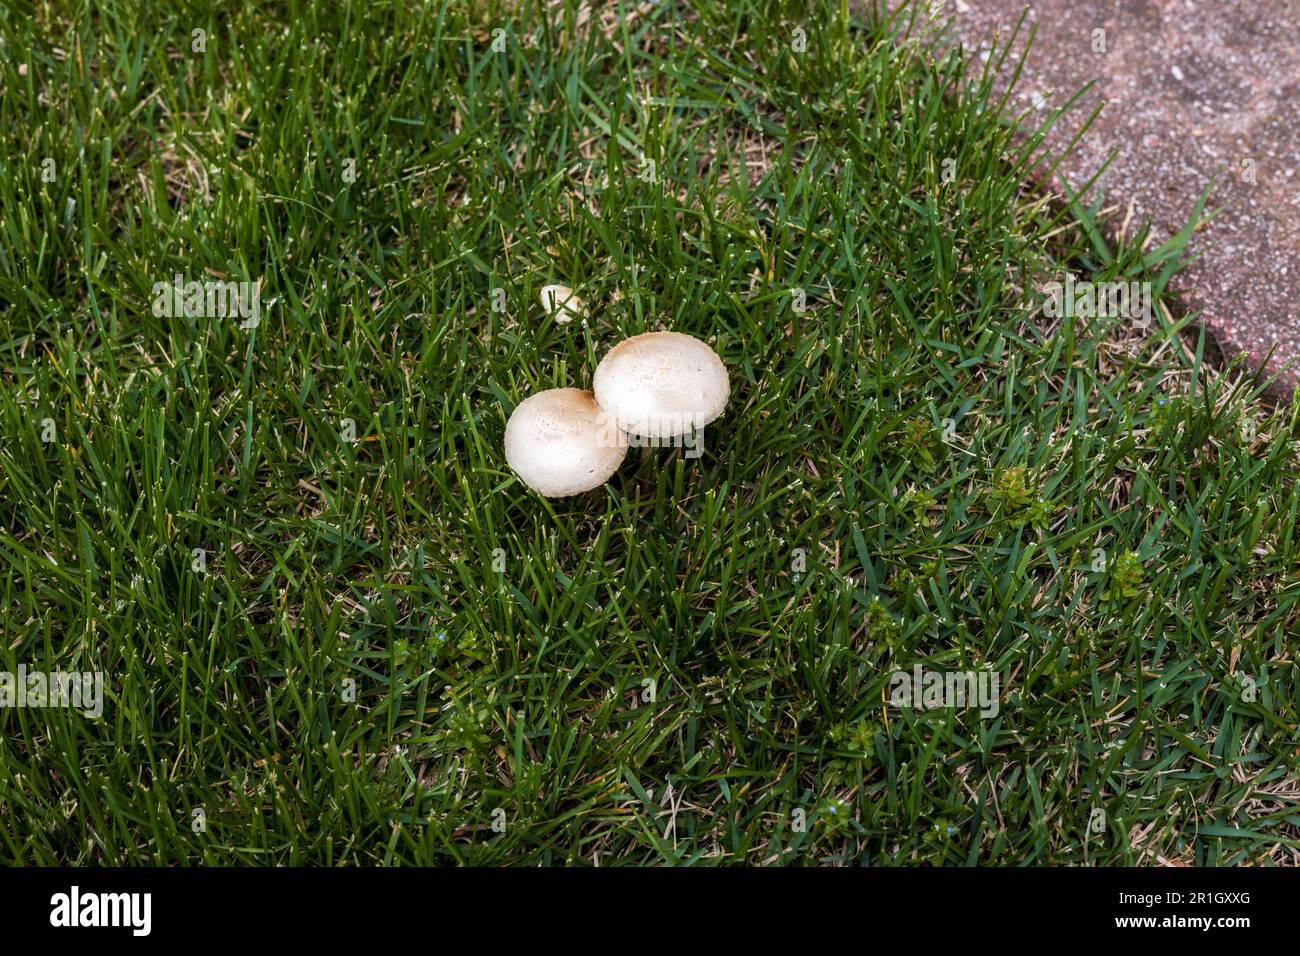 fairy ring mushrooms or toadstools growing in the yard Stock Photo